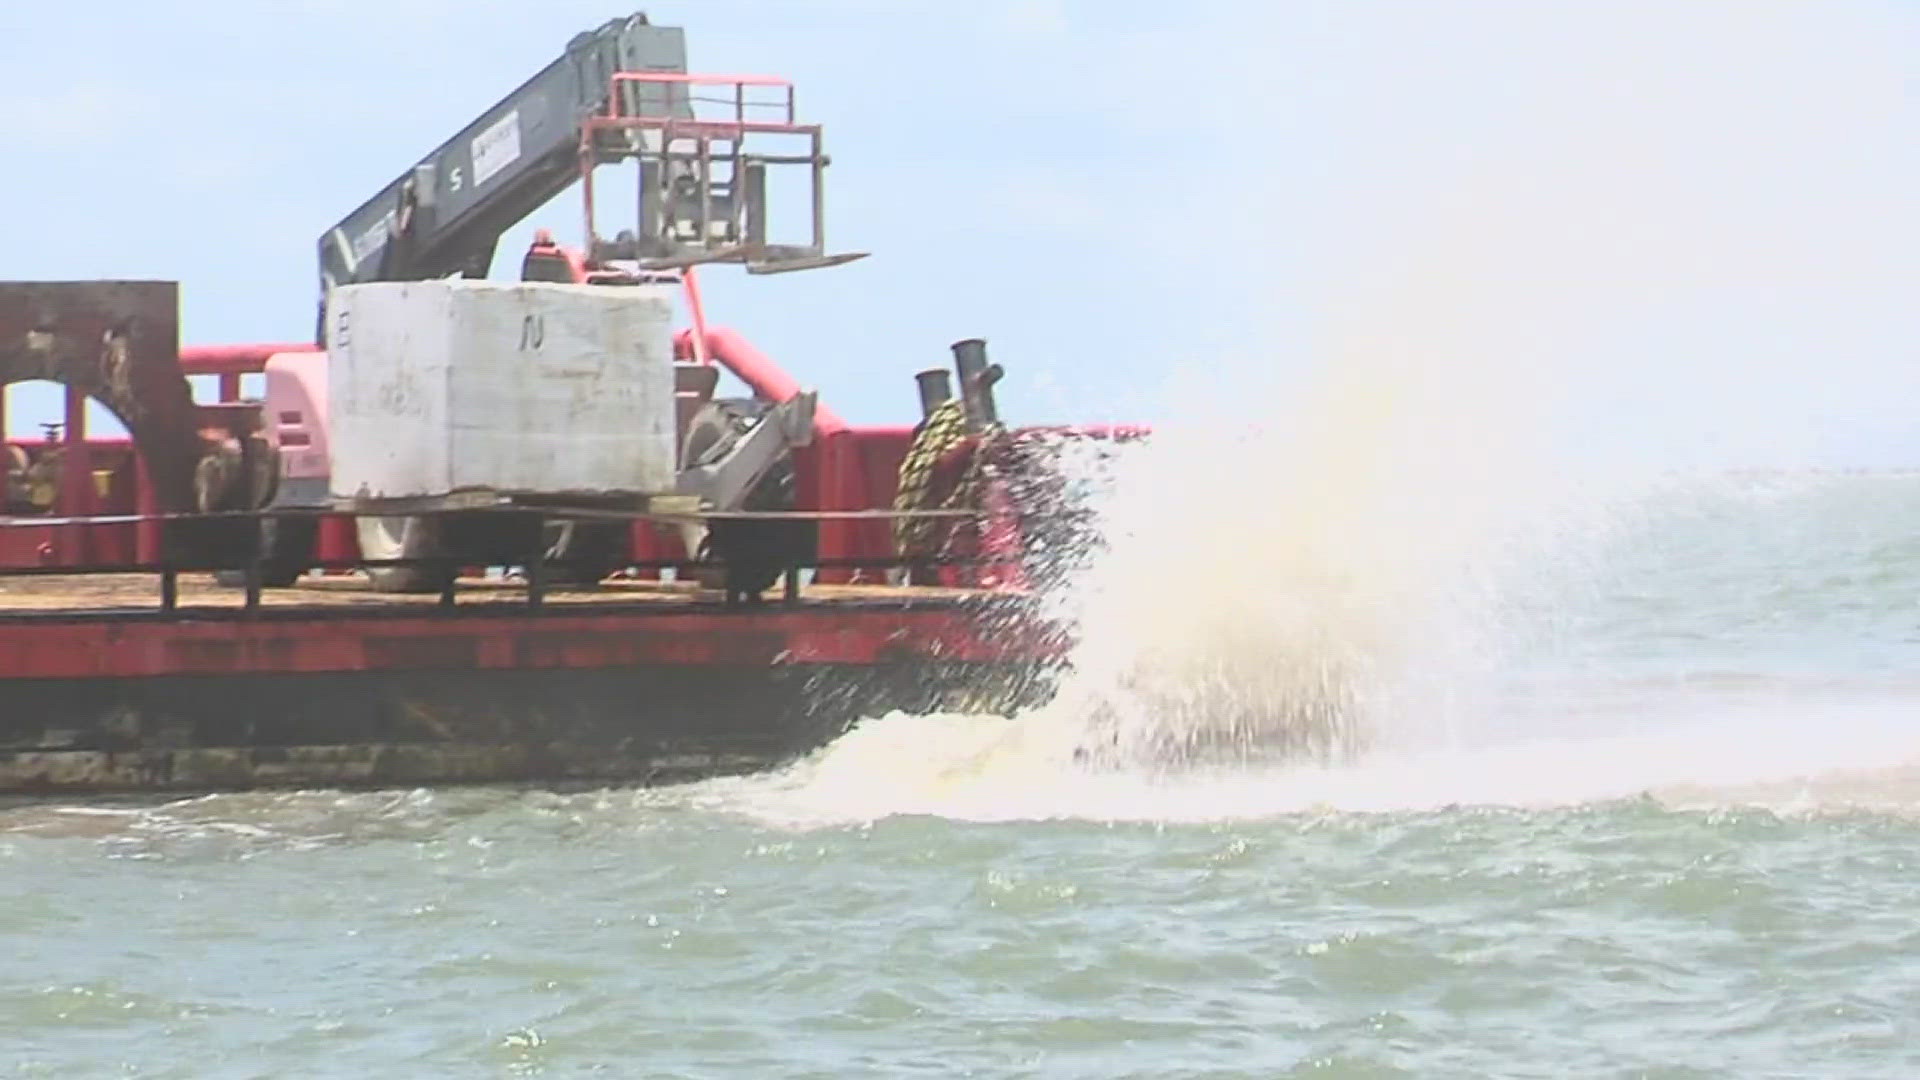 The reef, named HI-54 Shallow, is being built about two miles off the coast by Sea Rim State Park in Sabine Pass.